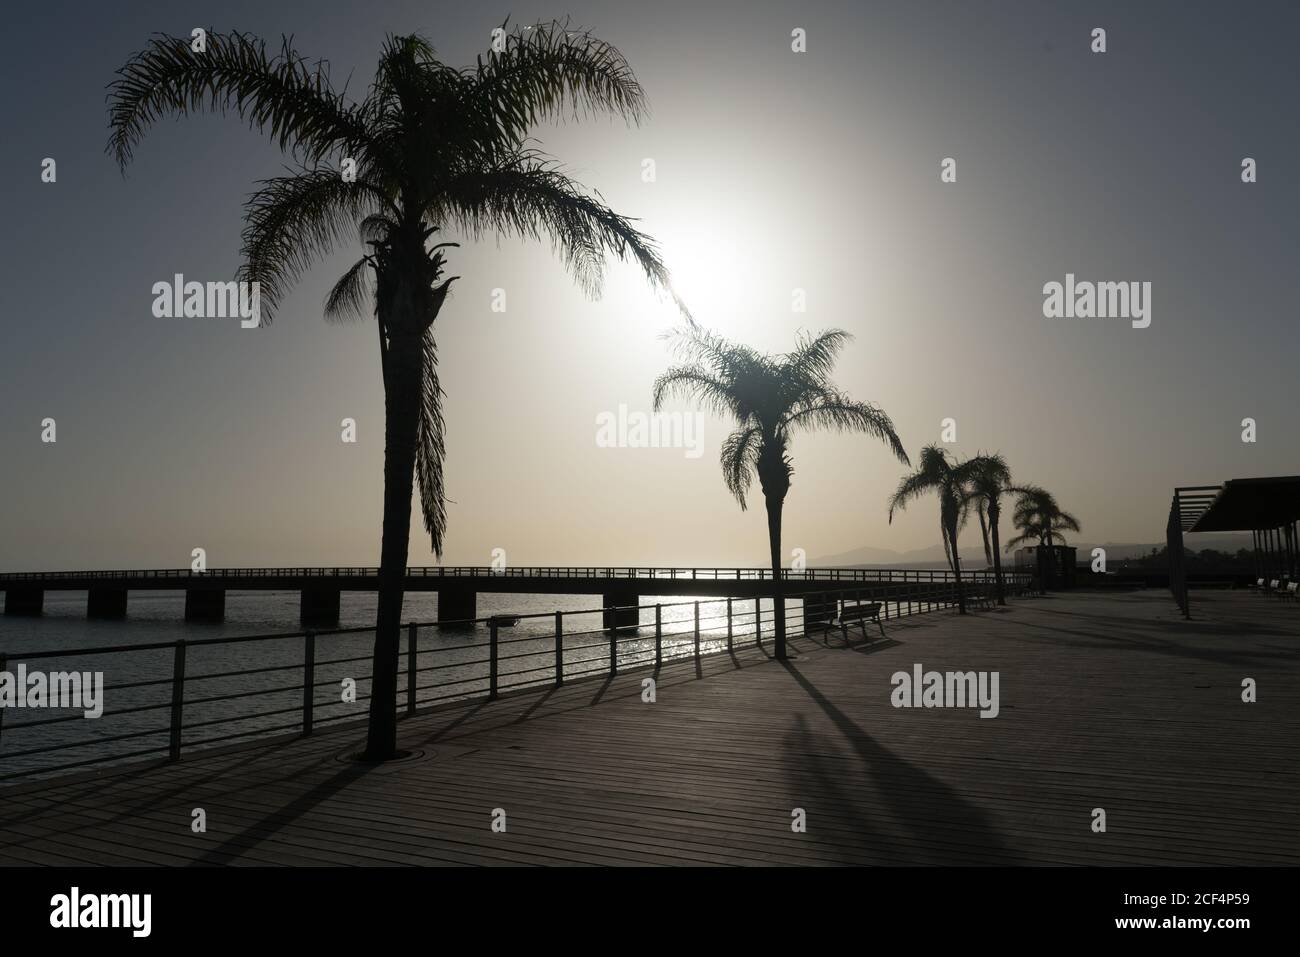 Wonderful tropical palms growing near water against bright sun on empty city embankment Stock Photo